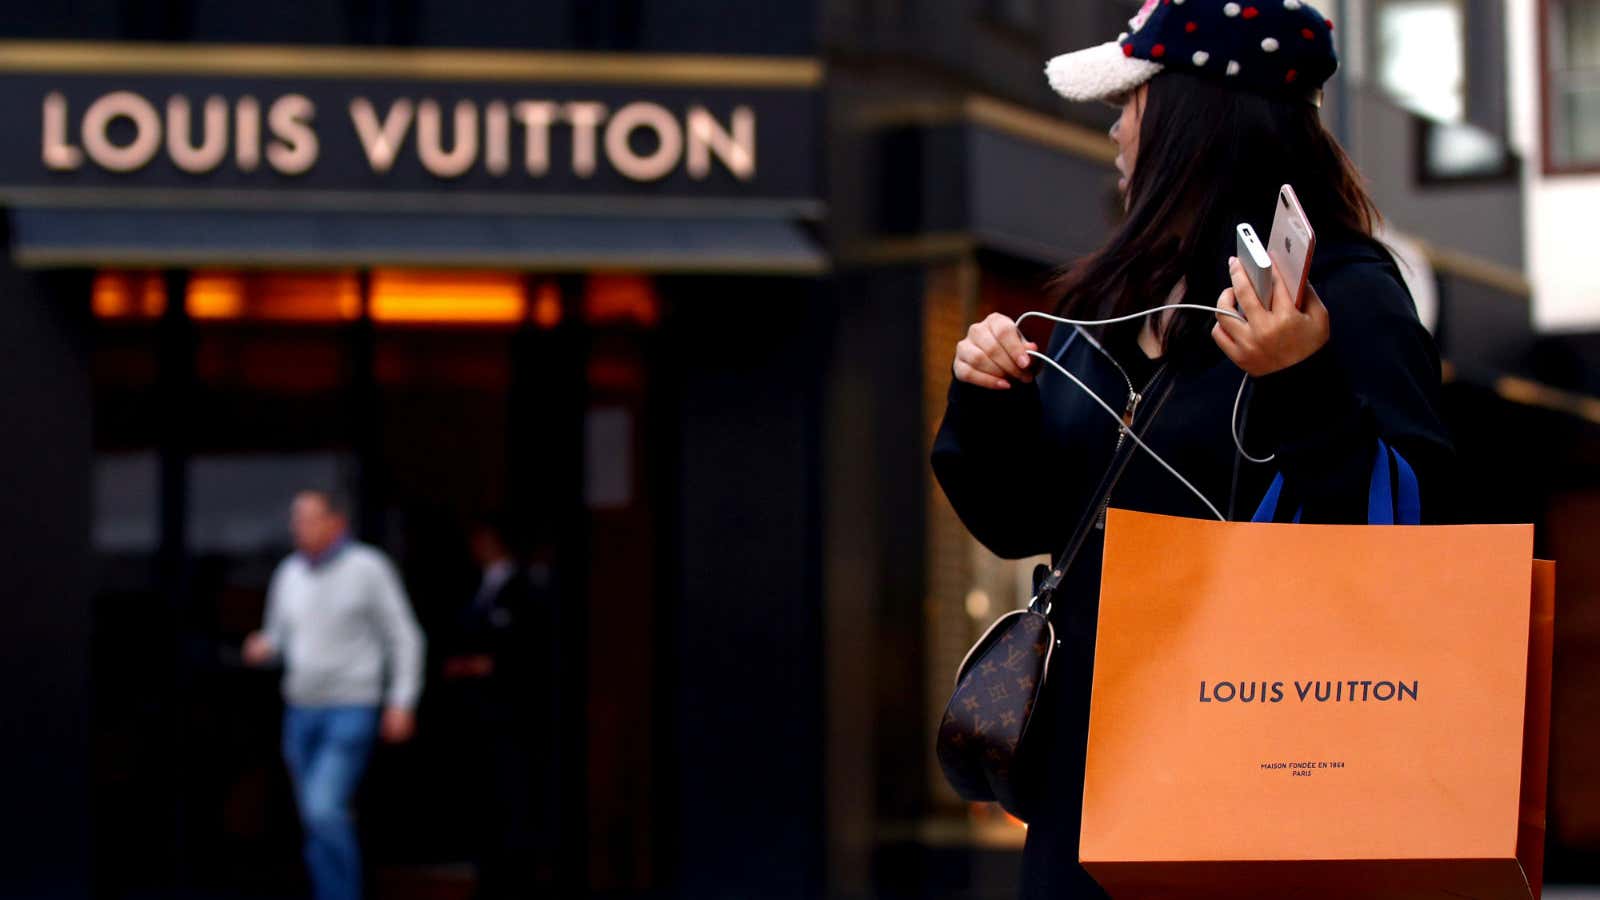 How much does copy Louis vuitton hand bags cost for ladies? - Quora